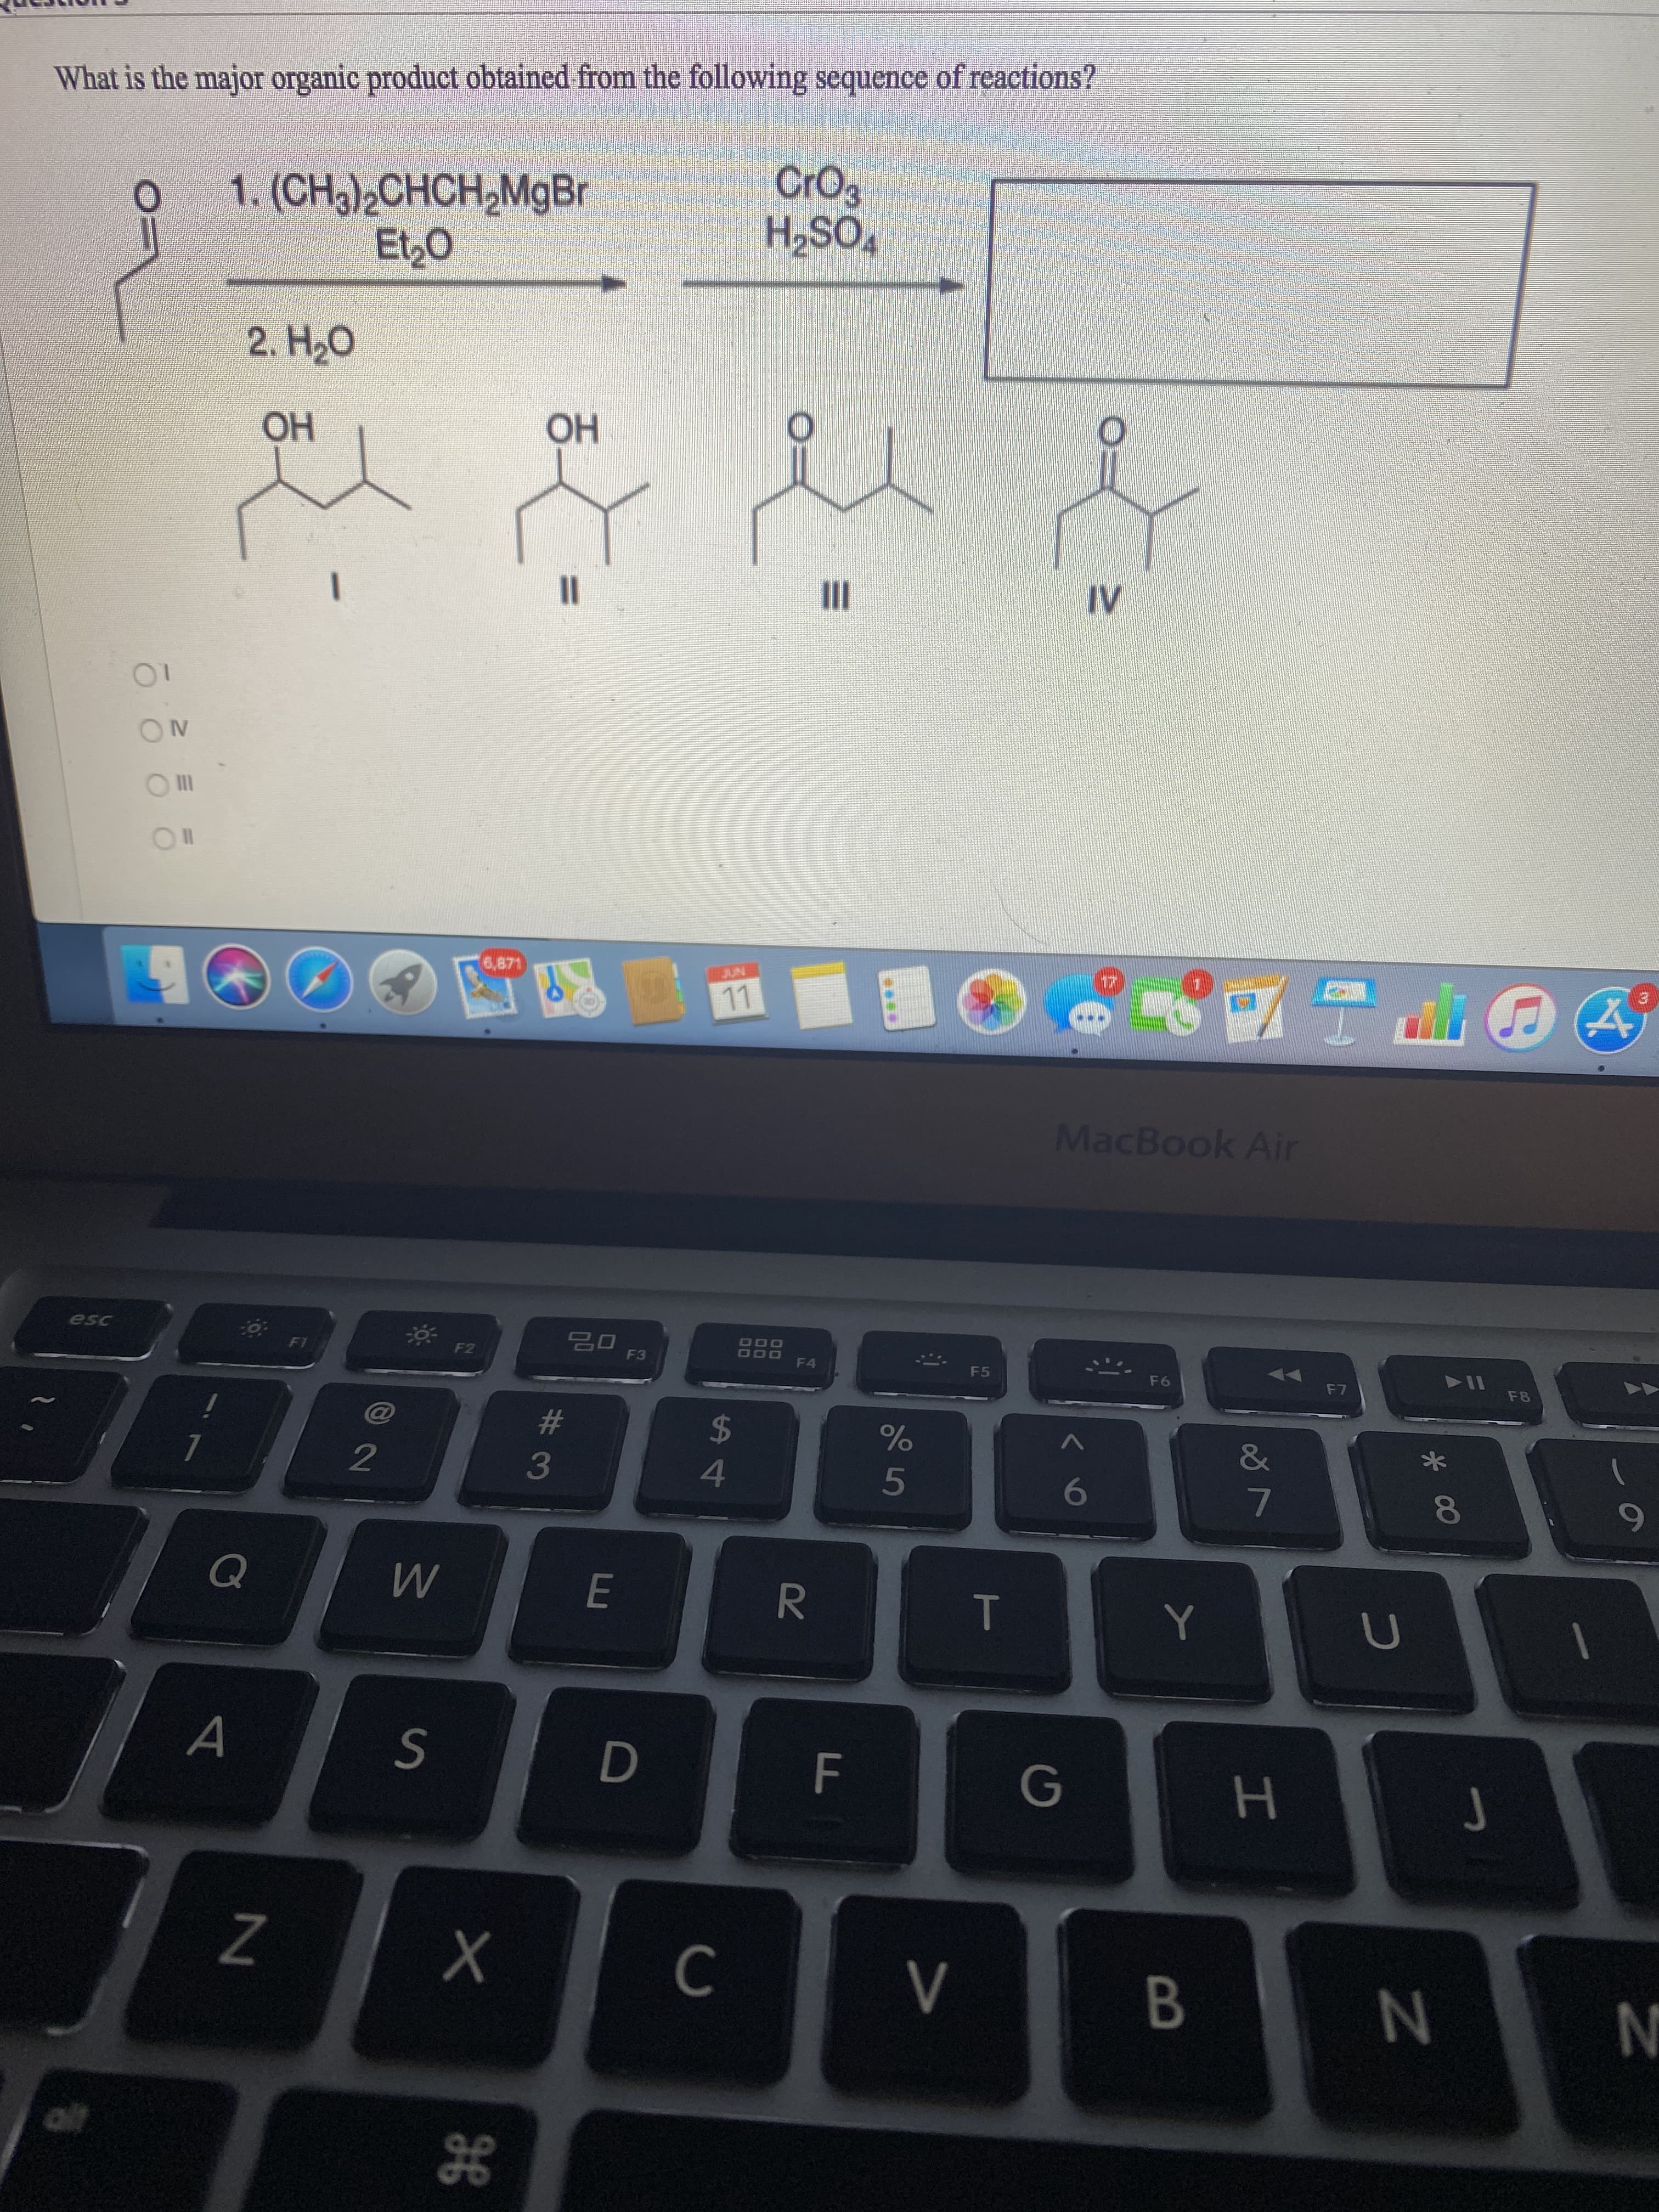 What is the major organic product obtained from the following sequence of reactions?
